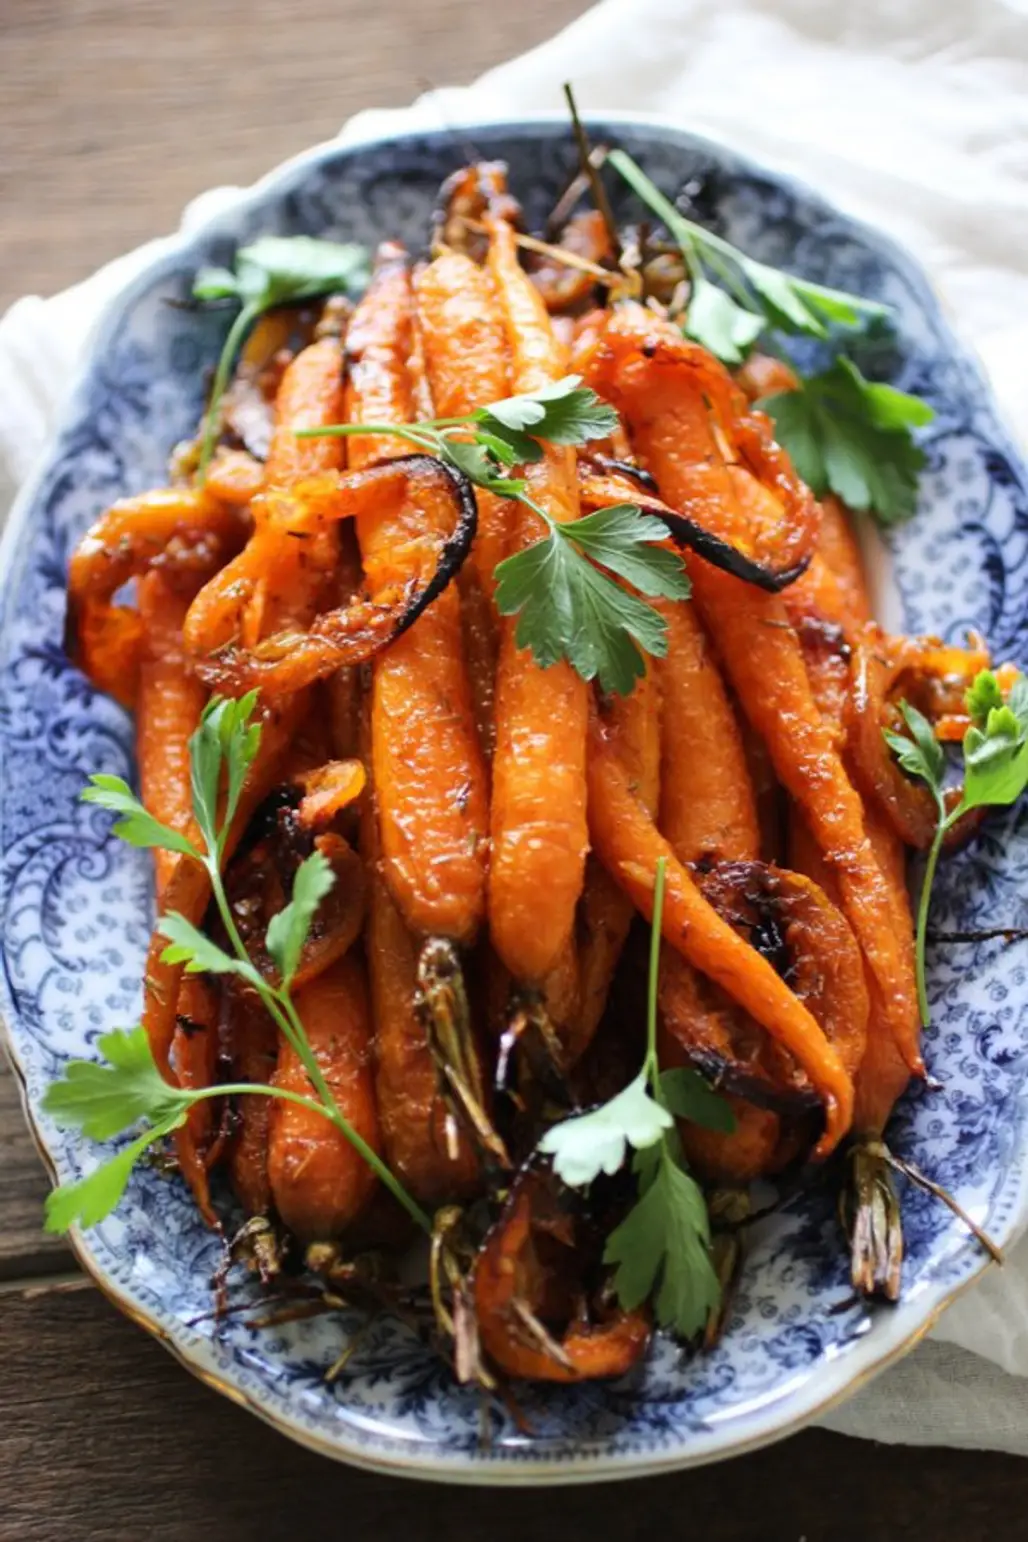 Carrots Are a Surprisingly Sweet Choice